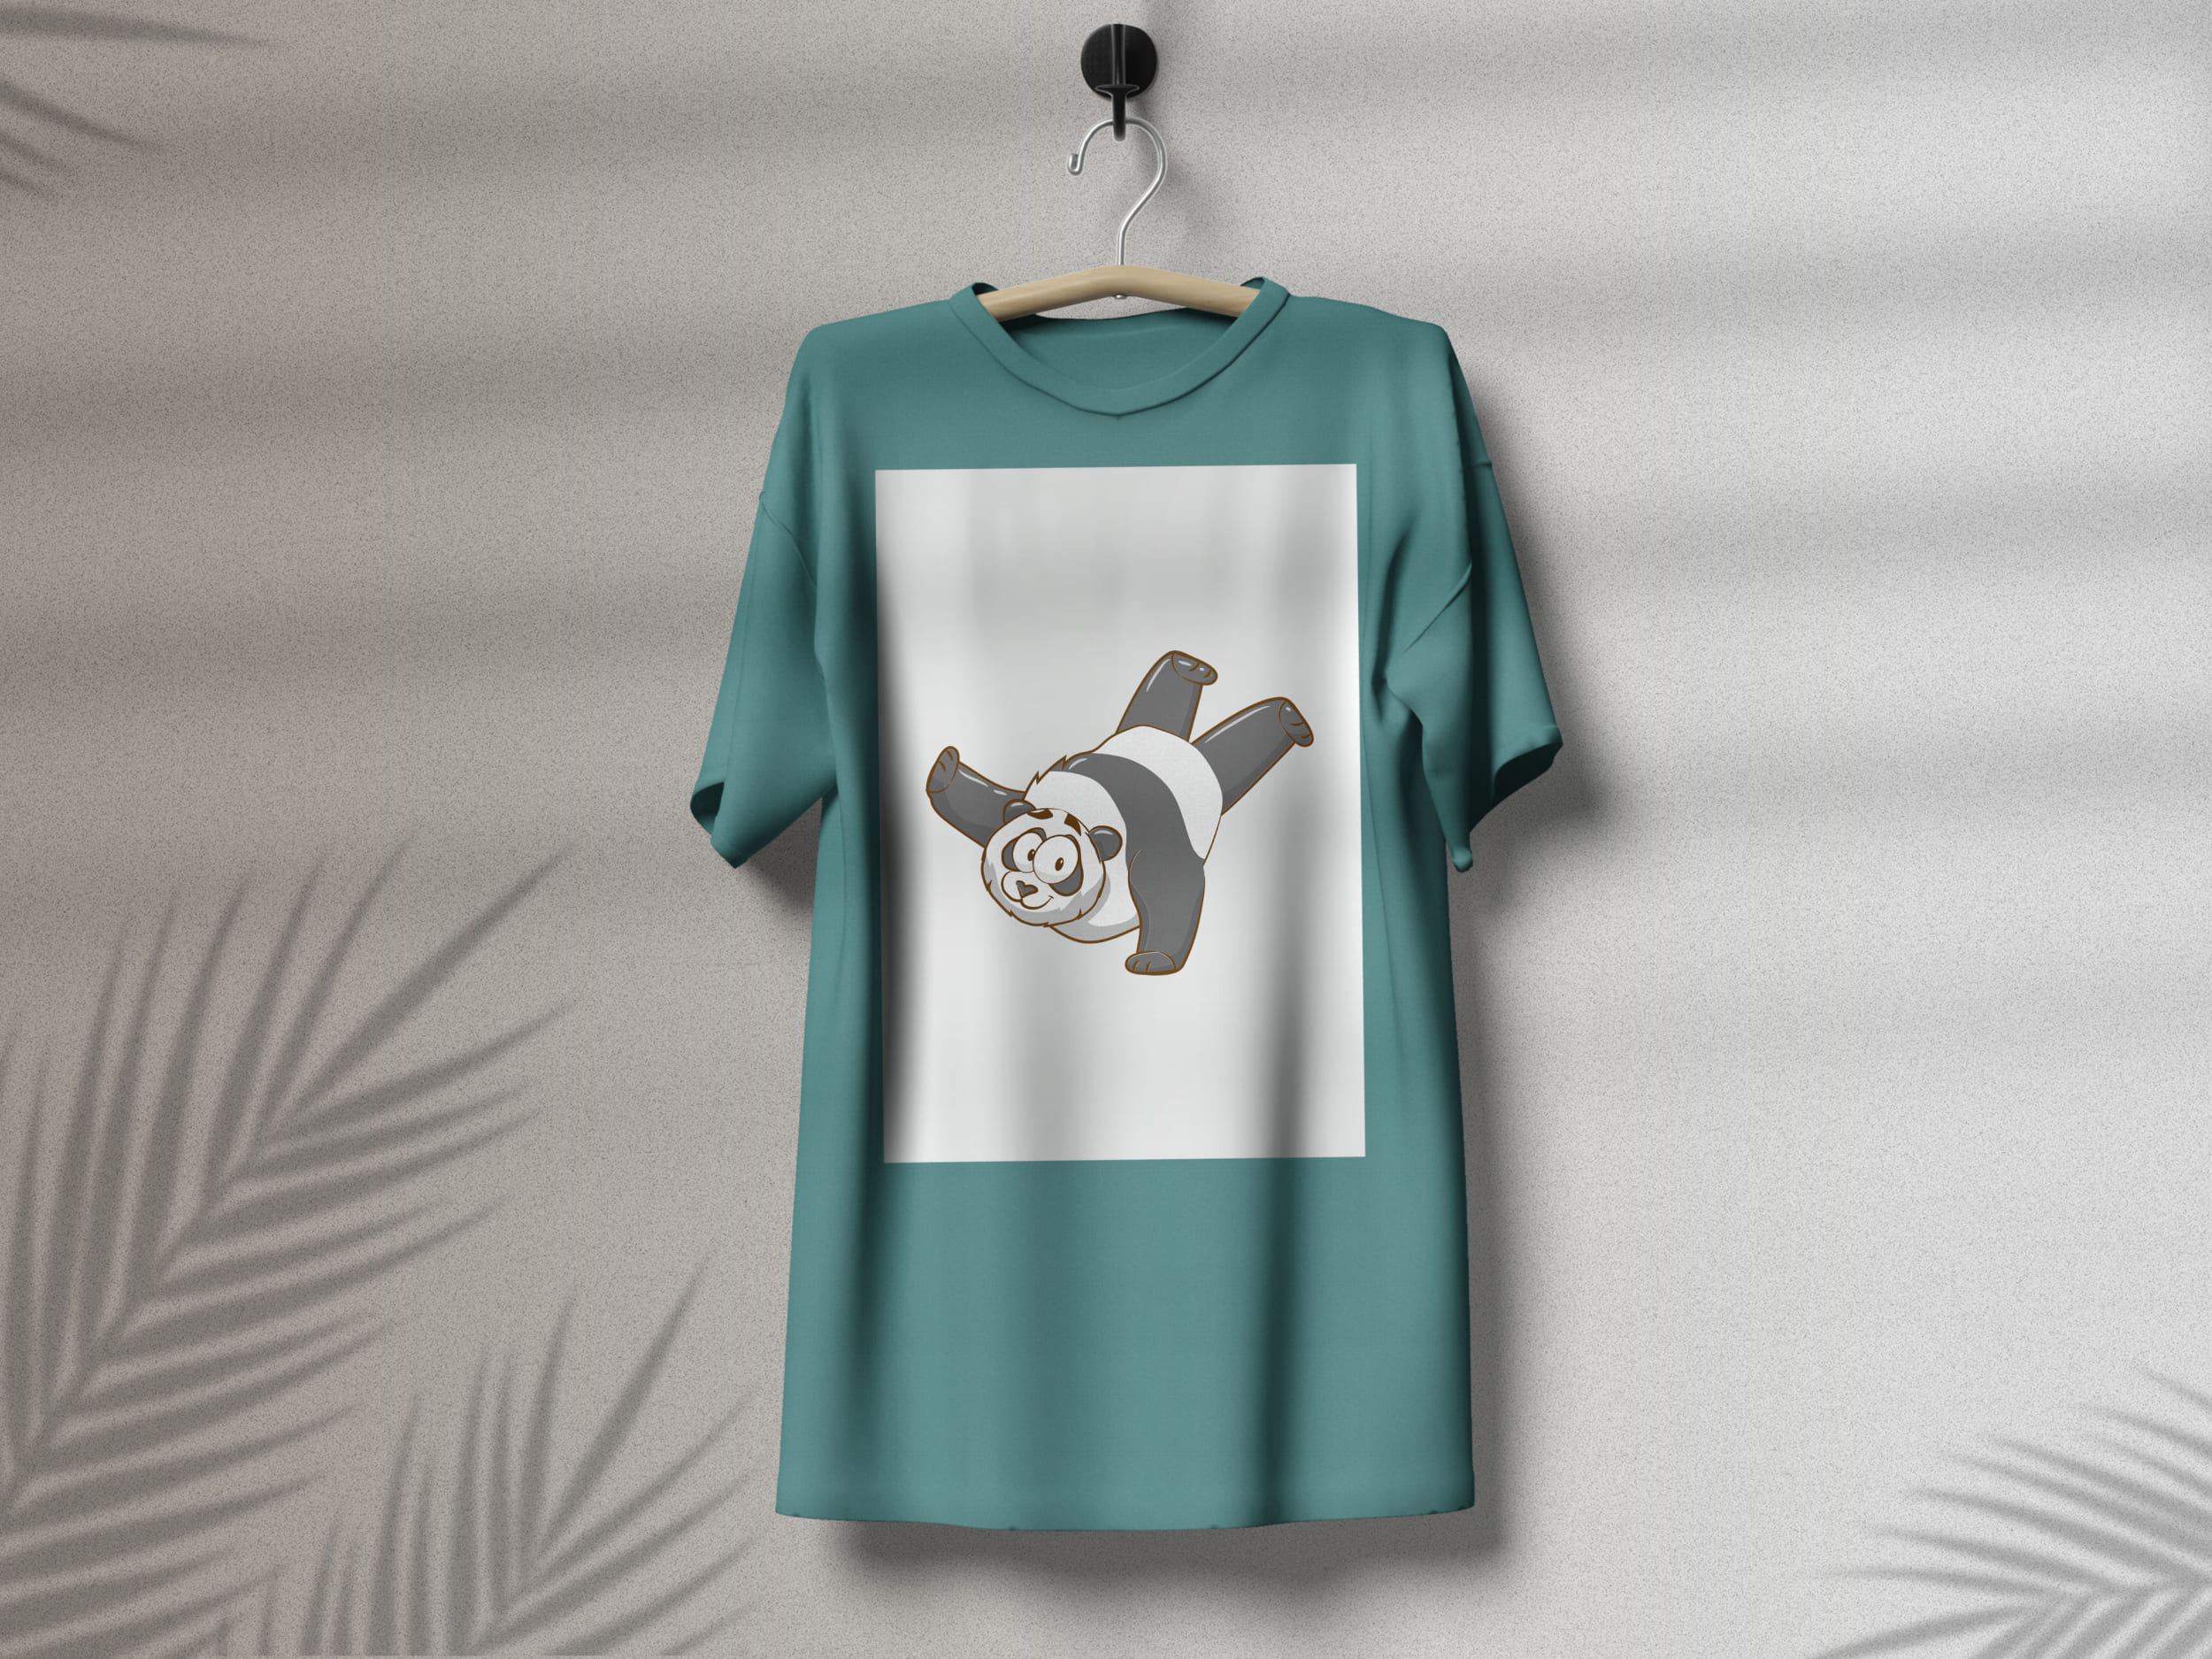 Turquoise t-shirt with a crazy panda on a white background, on a hanger on a gray background